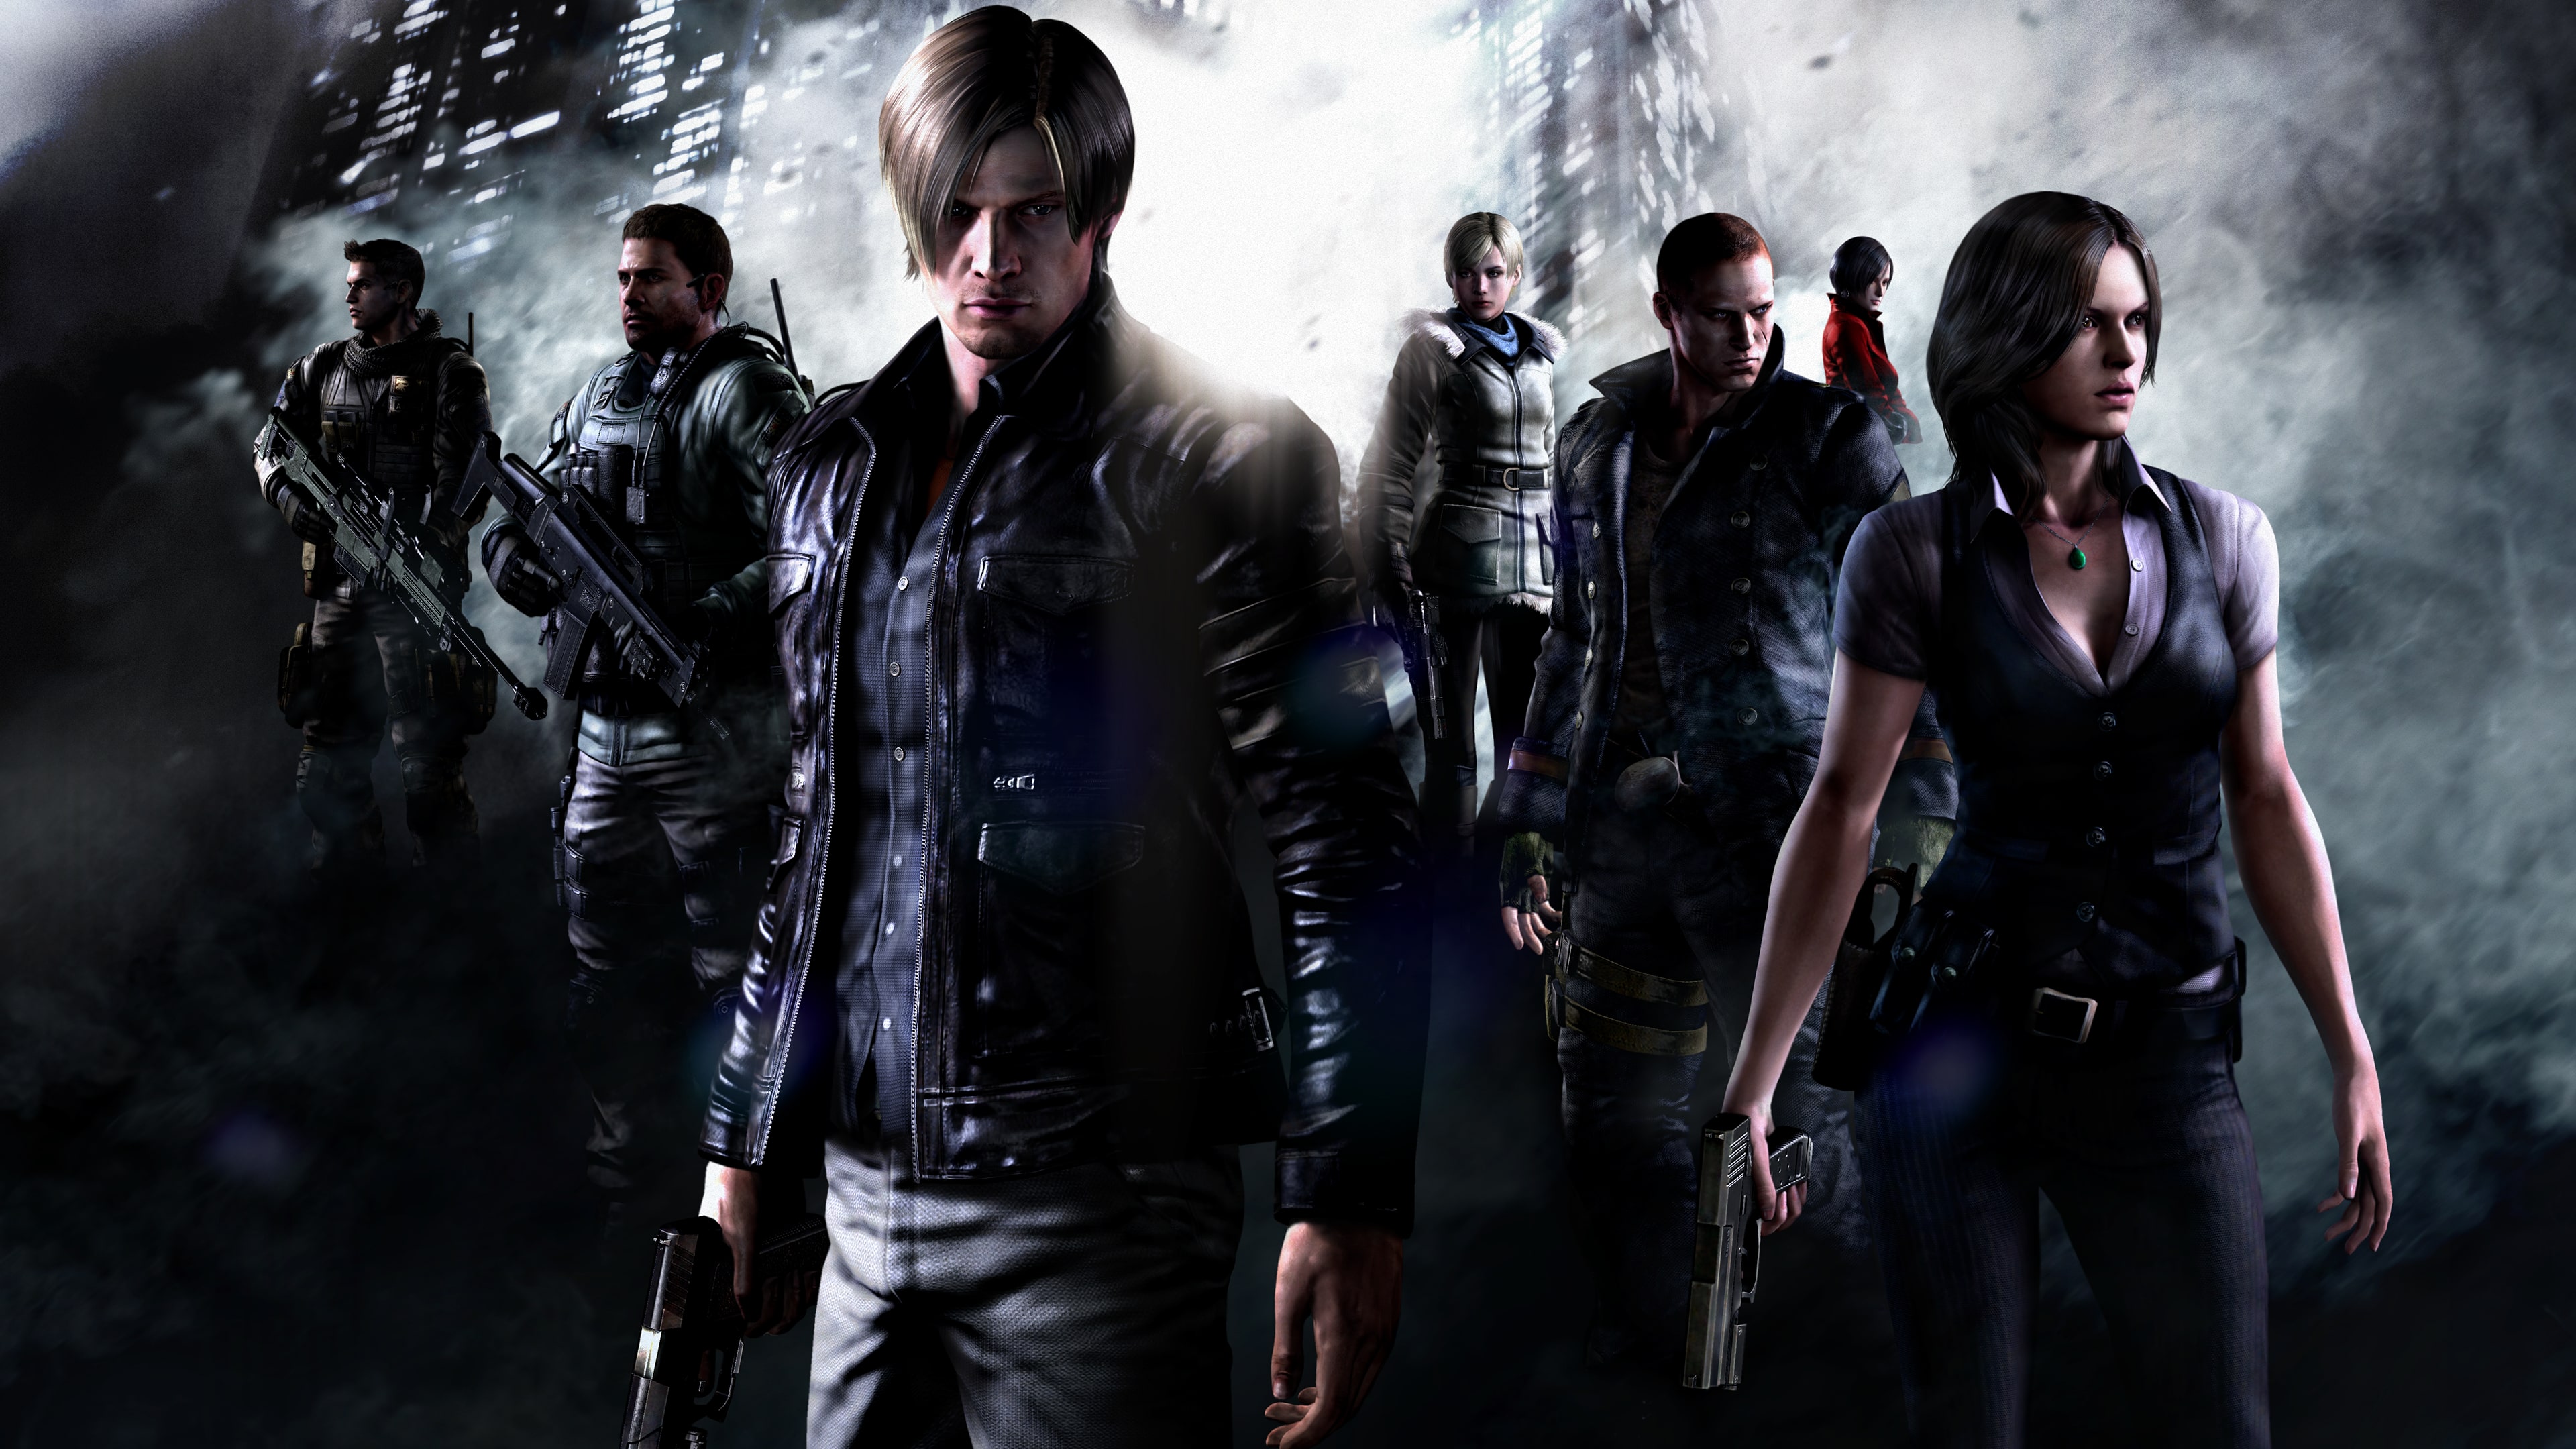 Resident Evil 6 (English/Chinese Ver.)